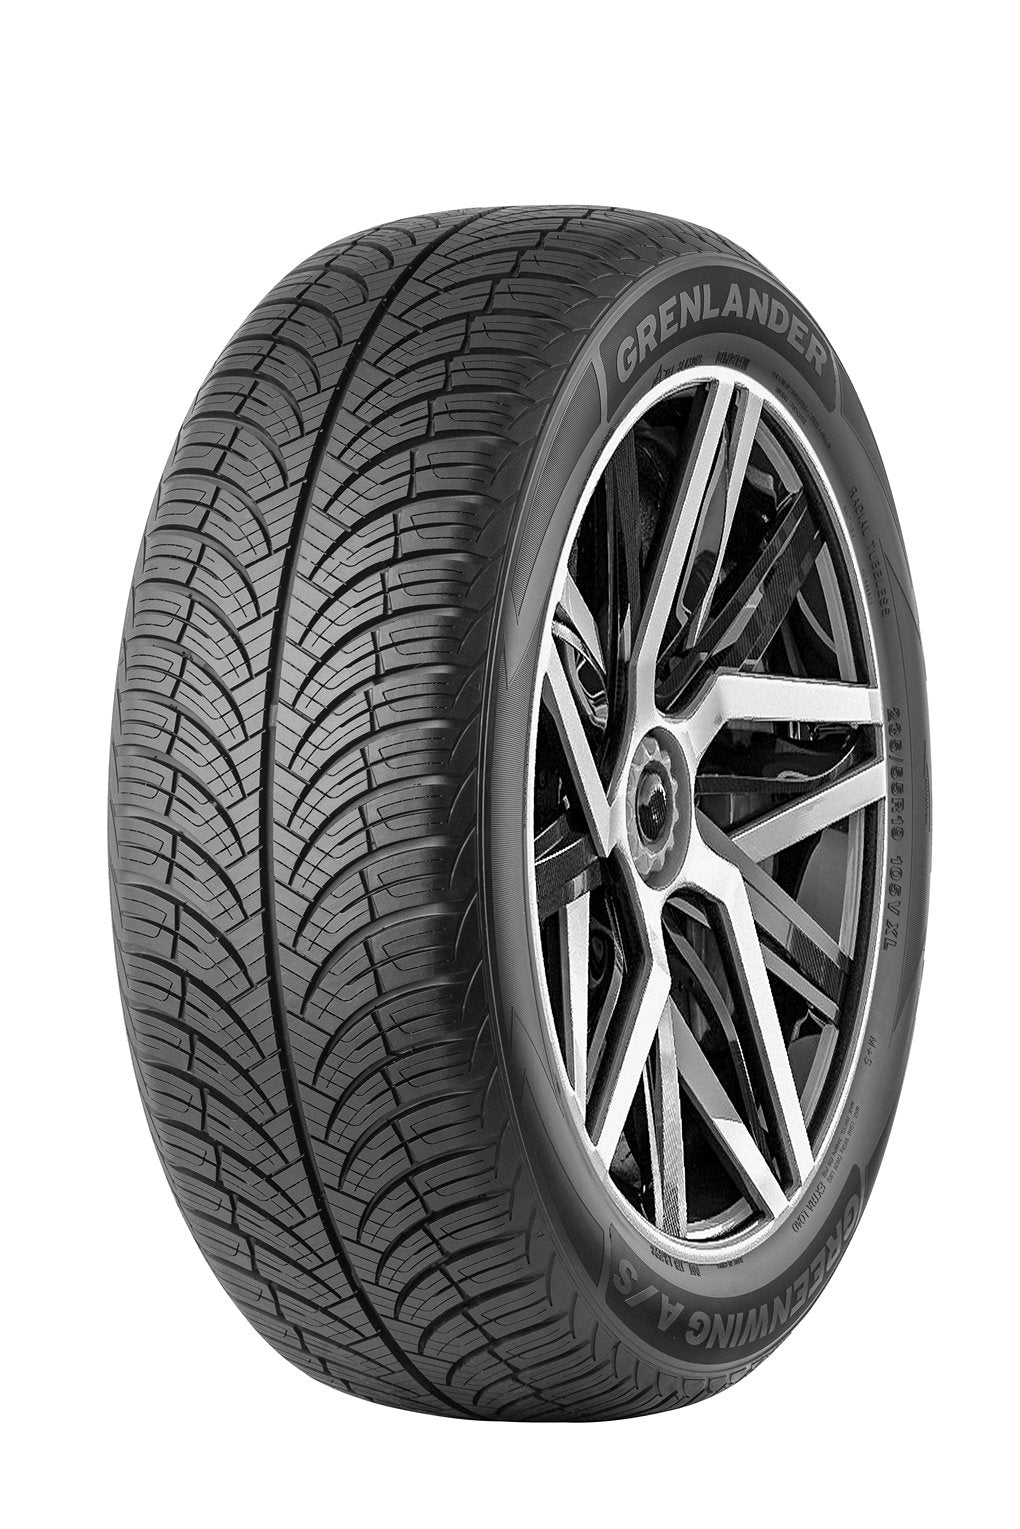 235/65R17 GRENLANDER GREENWING A/S ALL WEATHER - Toee Tire